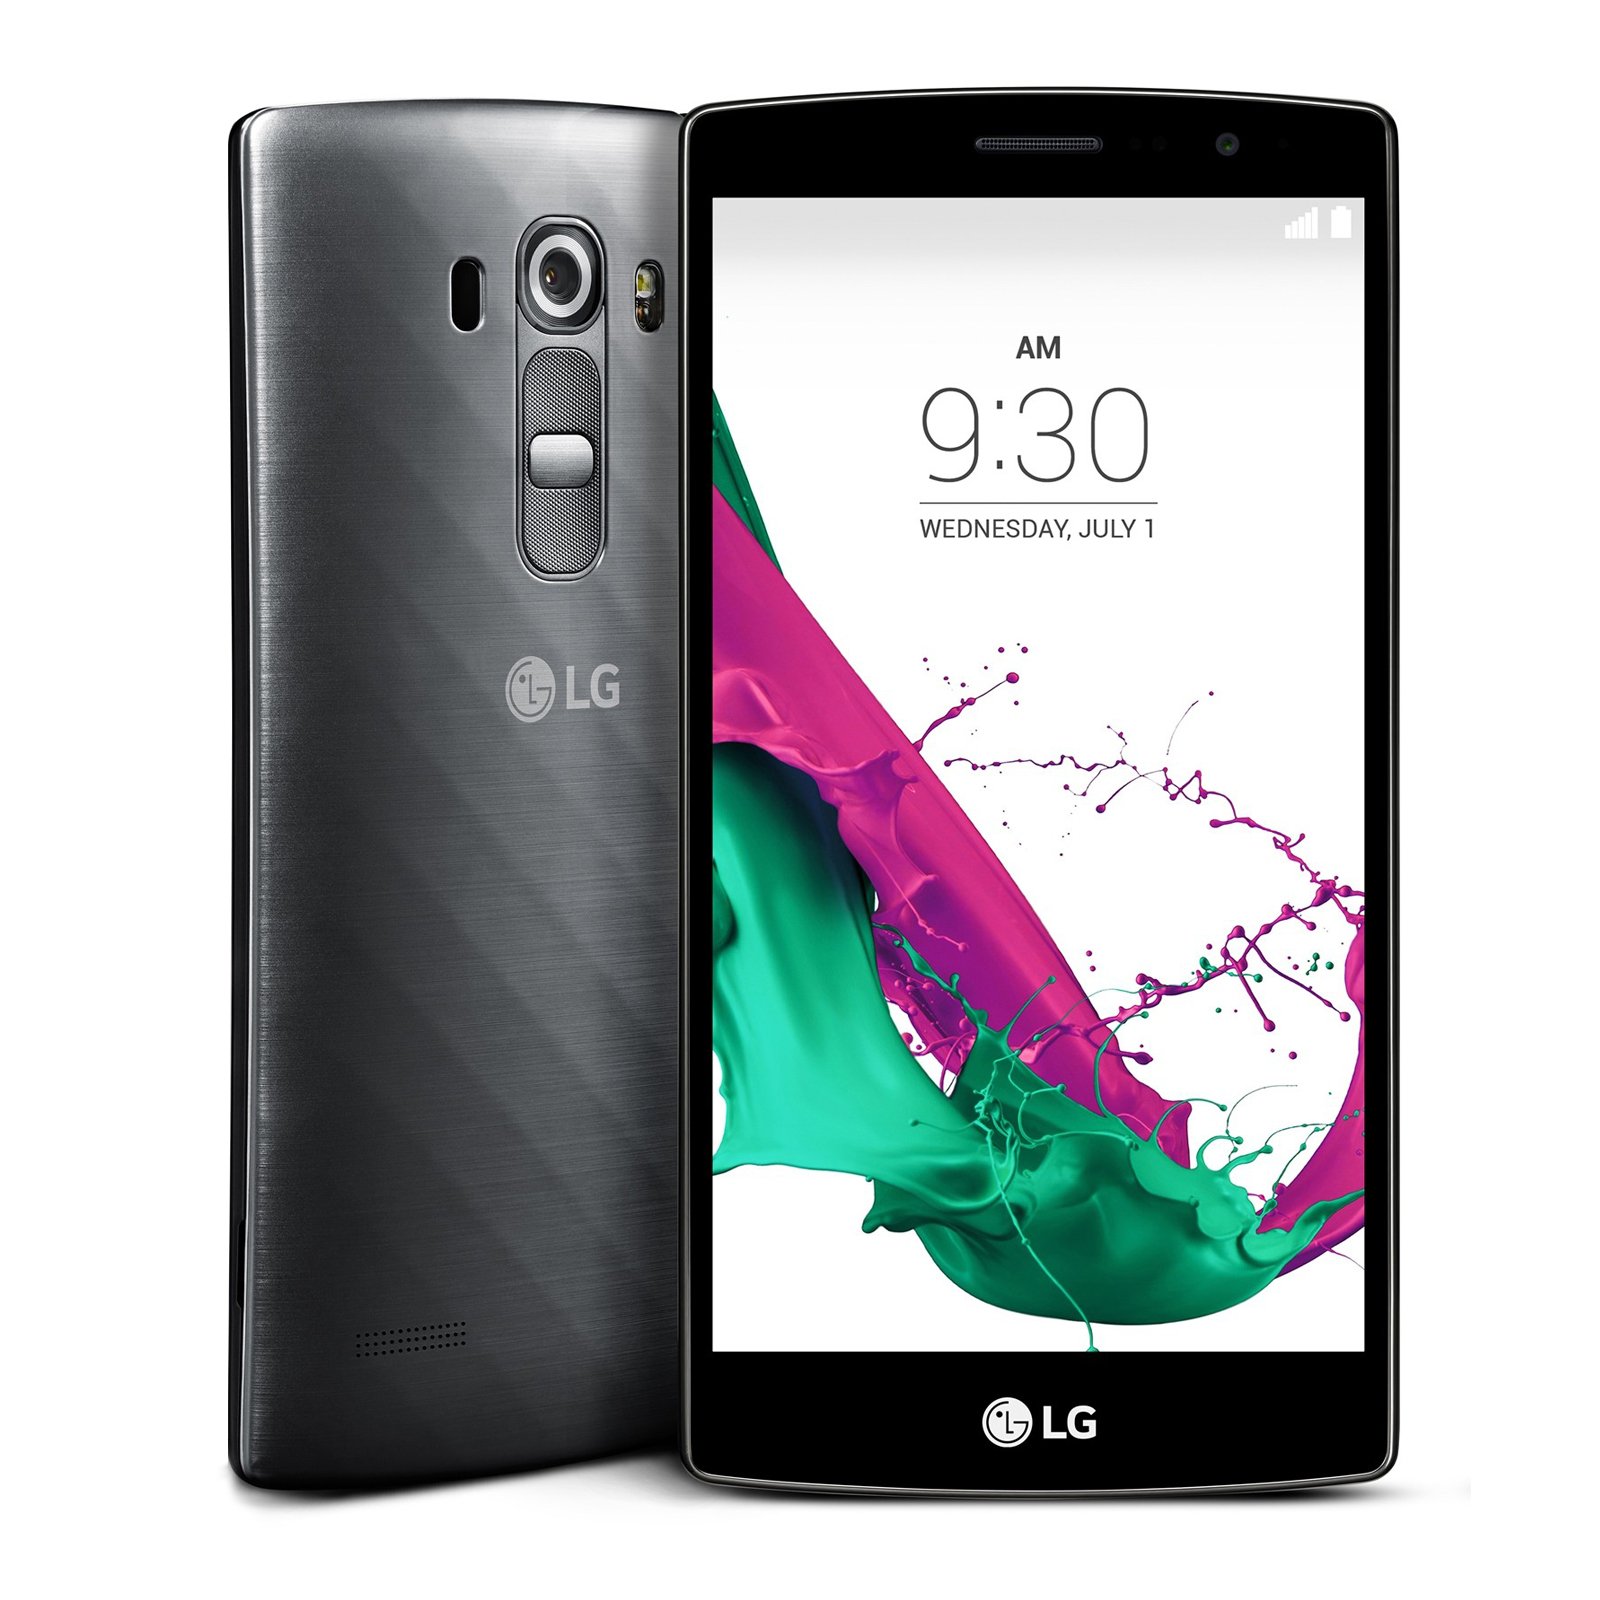 LG G4 Beat specs, review, release date - PhonesData